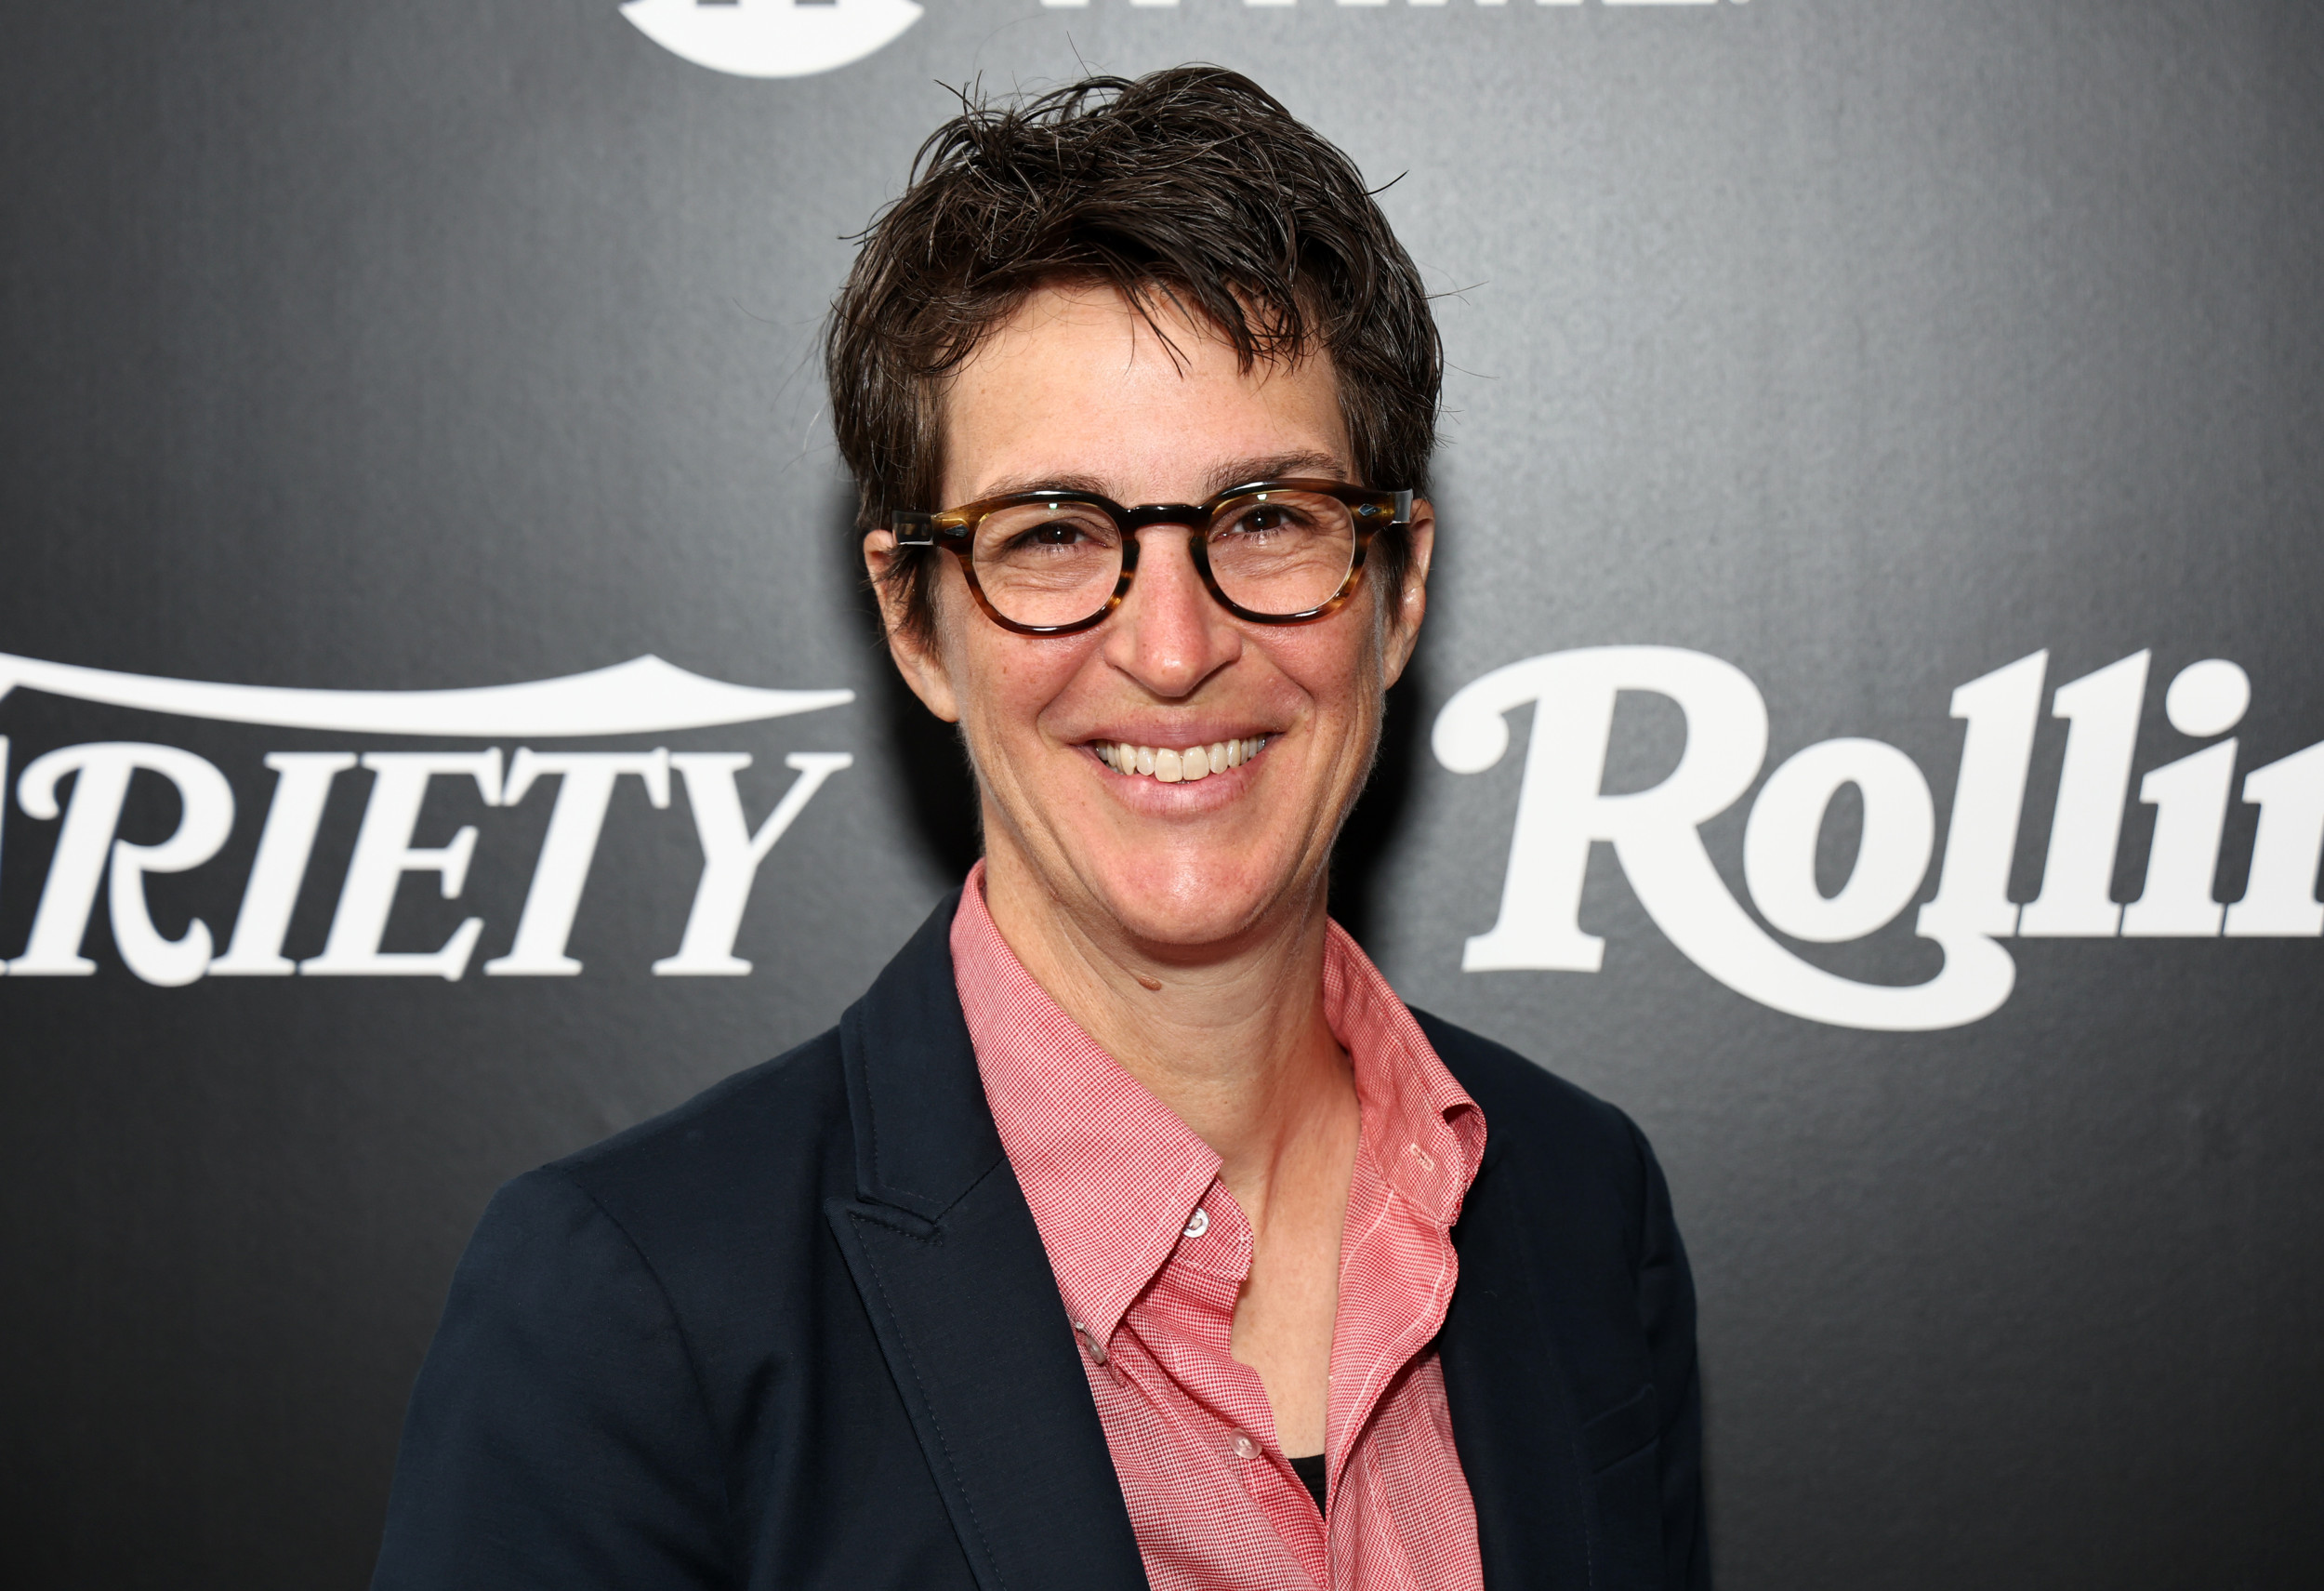 Rachel Maddow Screamed at During Event: ‘Warmonger!’